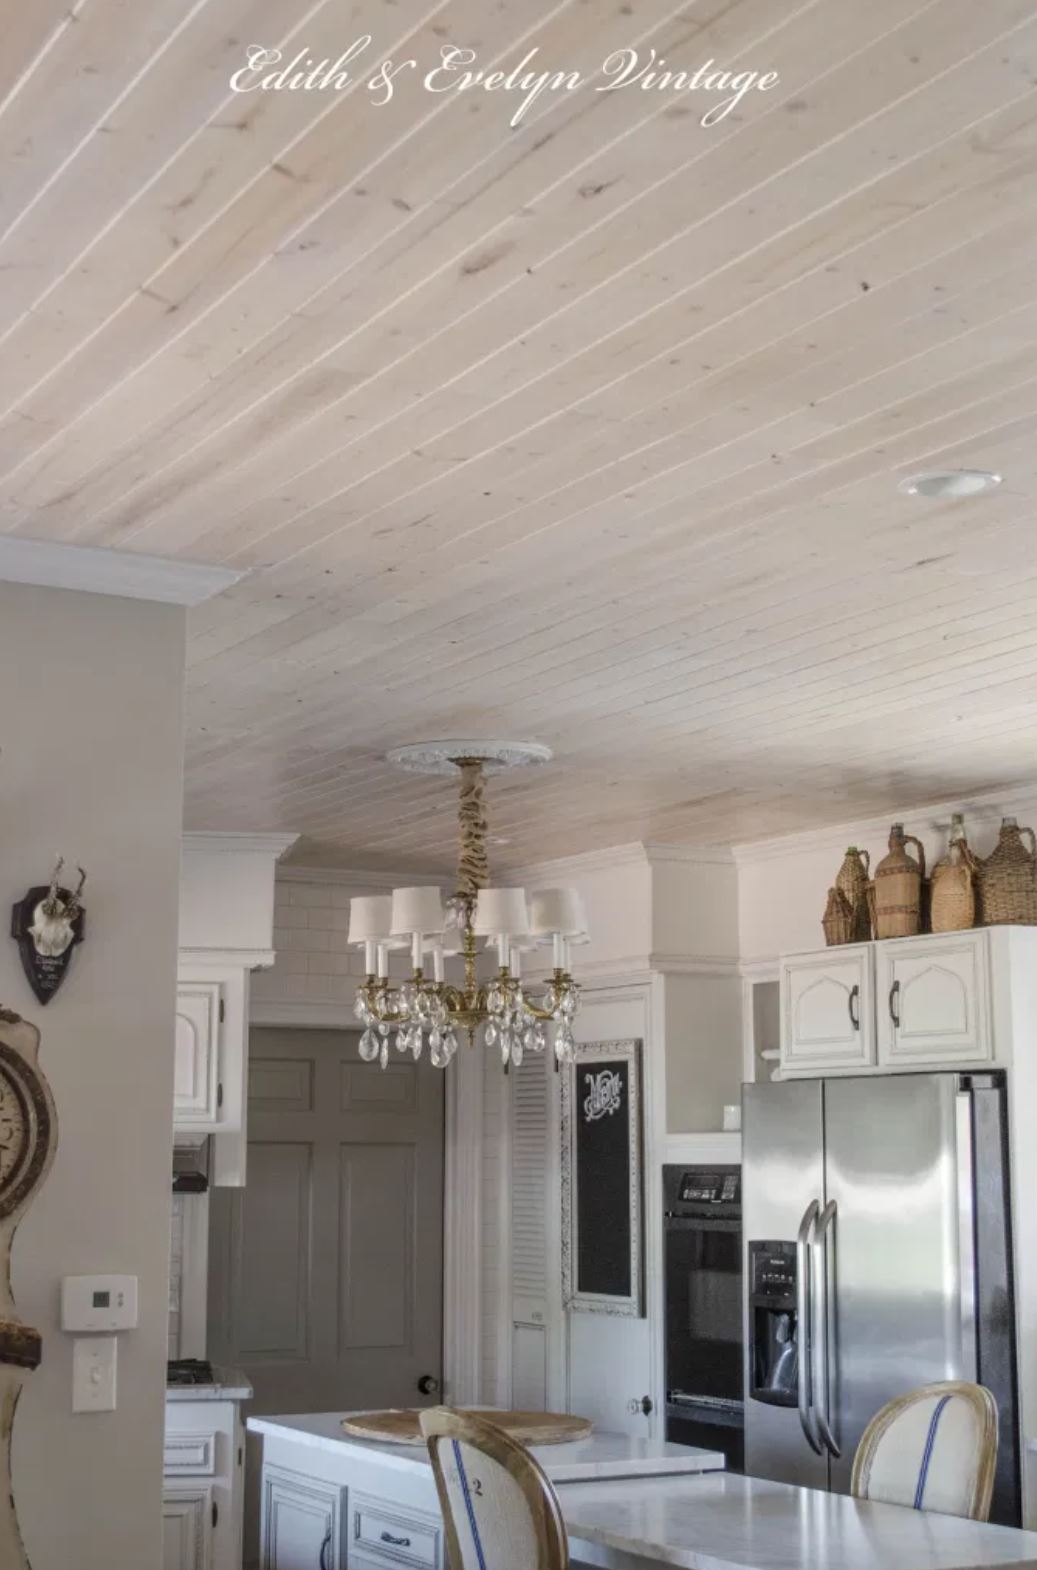 Rustic planked ceiling in a French country kitchen.